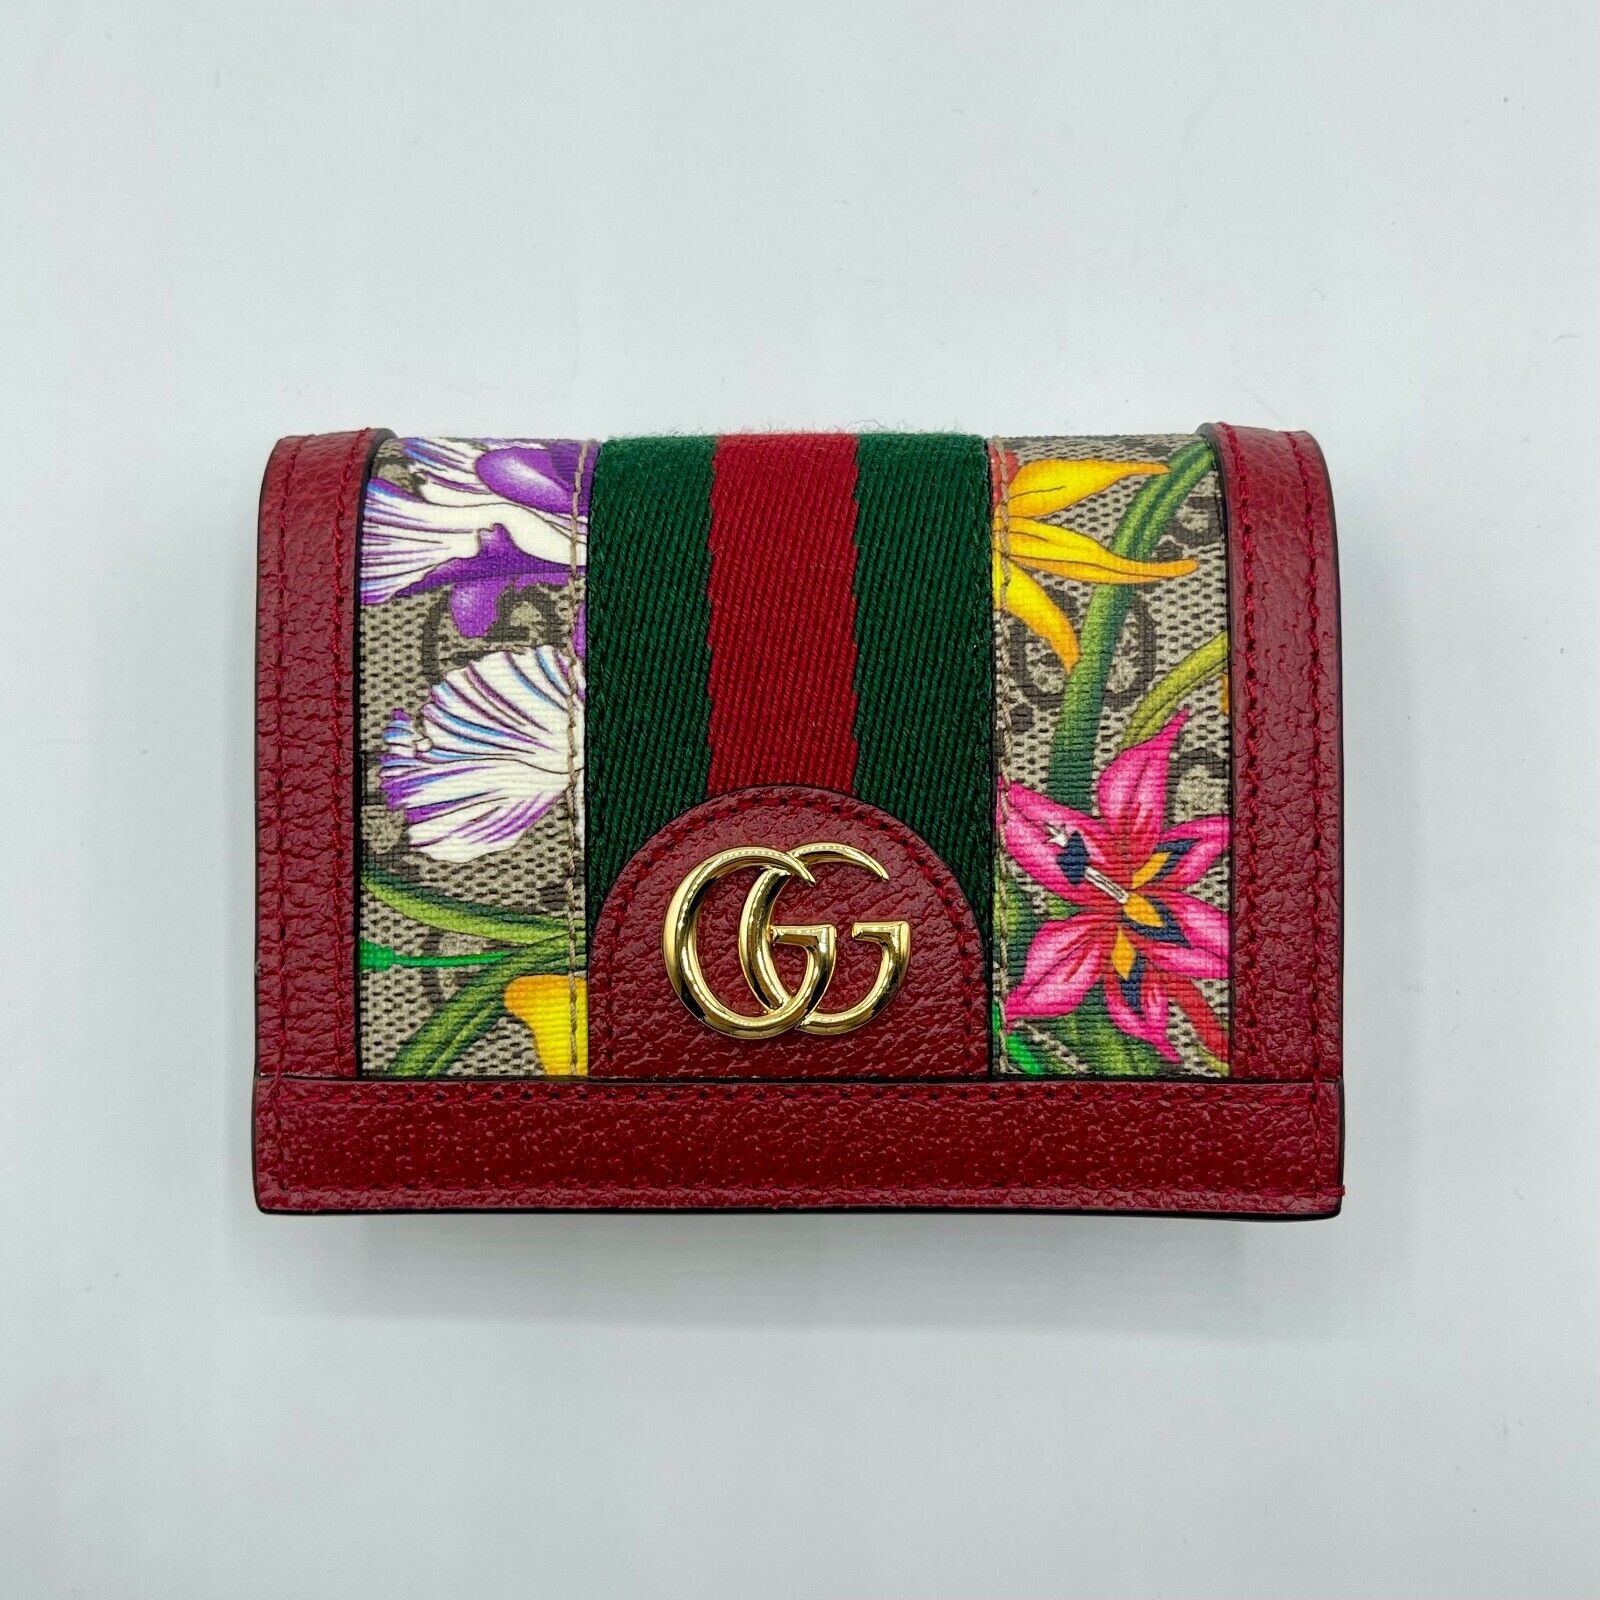 Gucci Supreme GG Canvas Floral Coin Wallet with Red Leather Trim 523155 8722 m